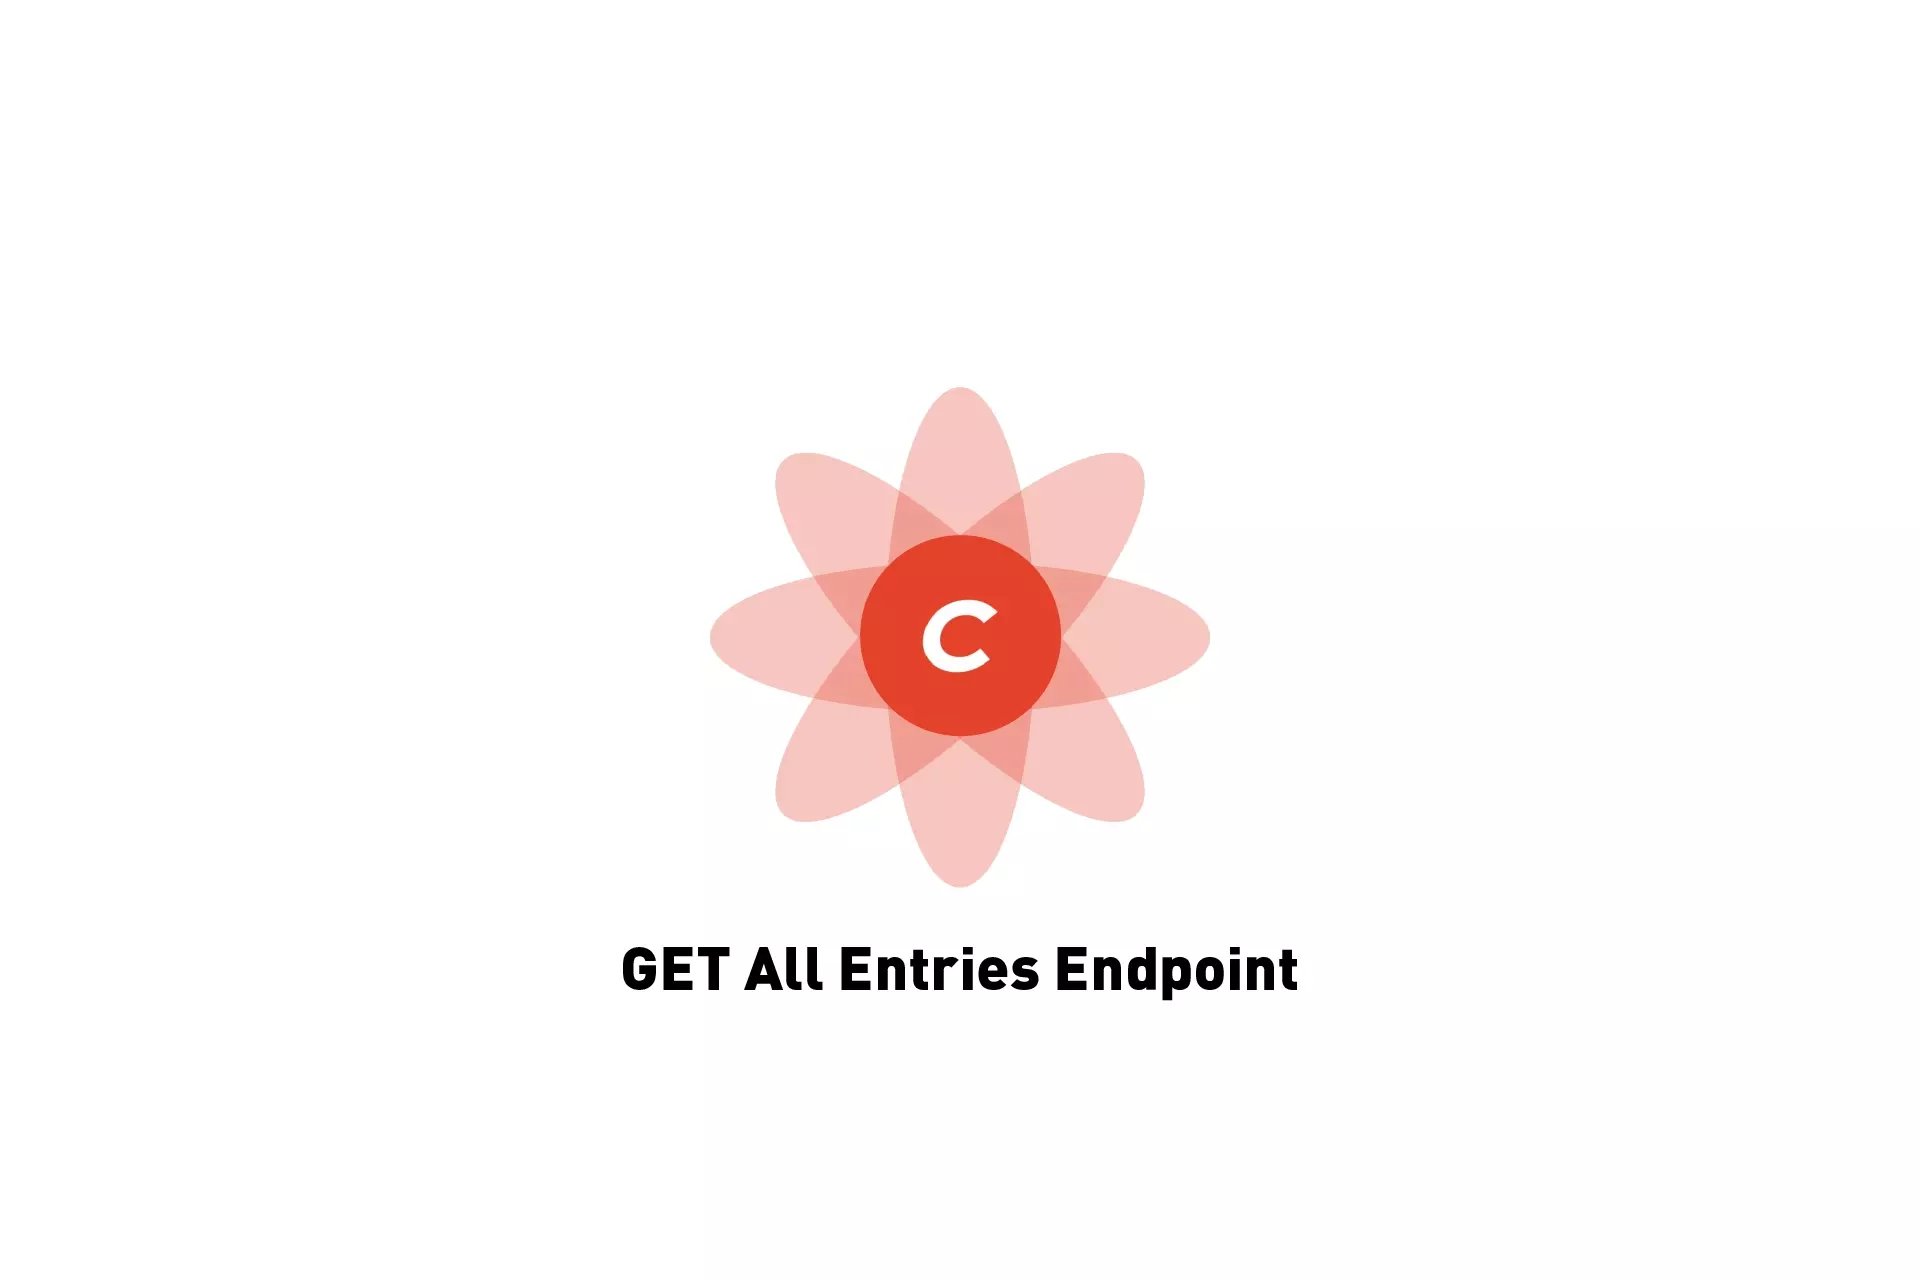 A flower that represents Craft CMS with the text "GET All Entries Endpoint" beneath it.